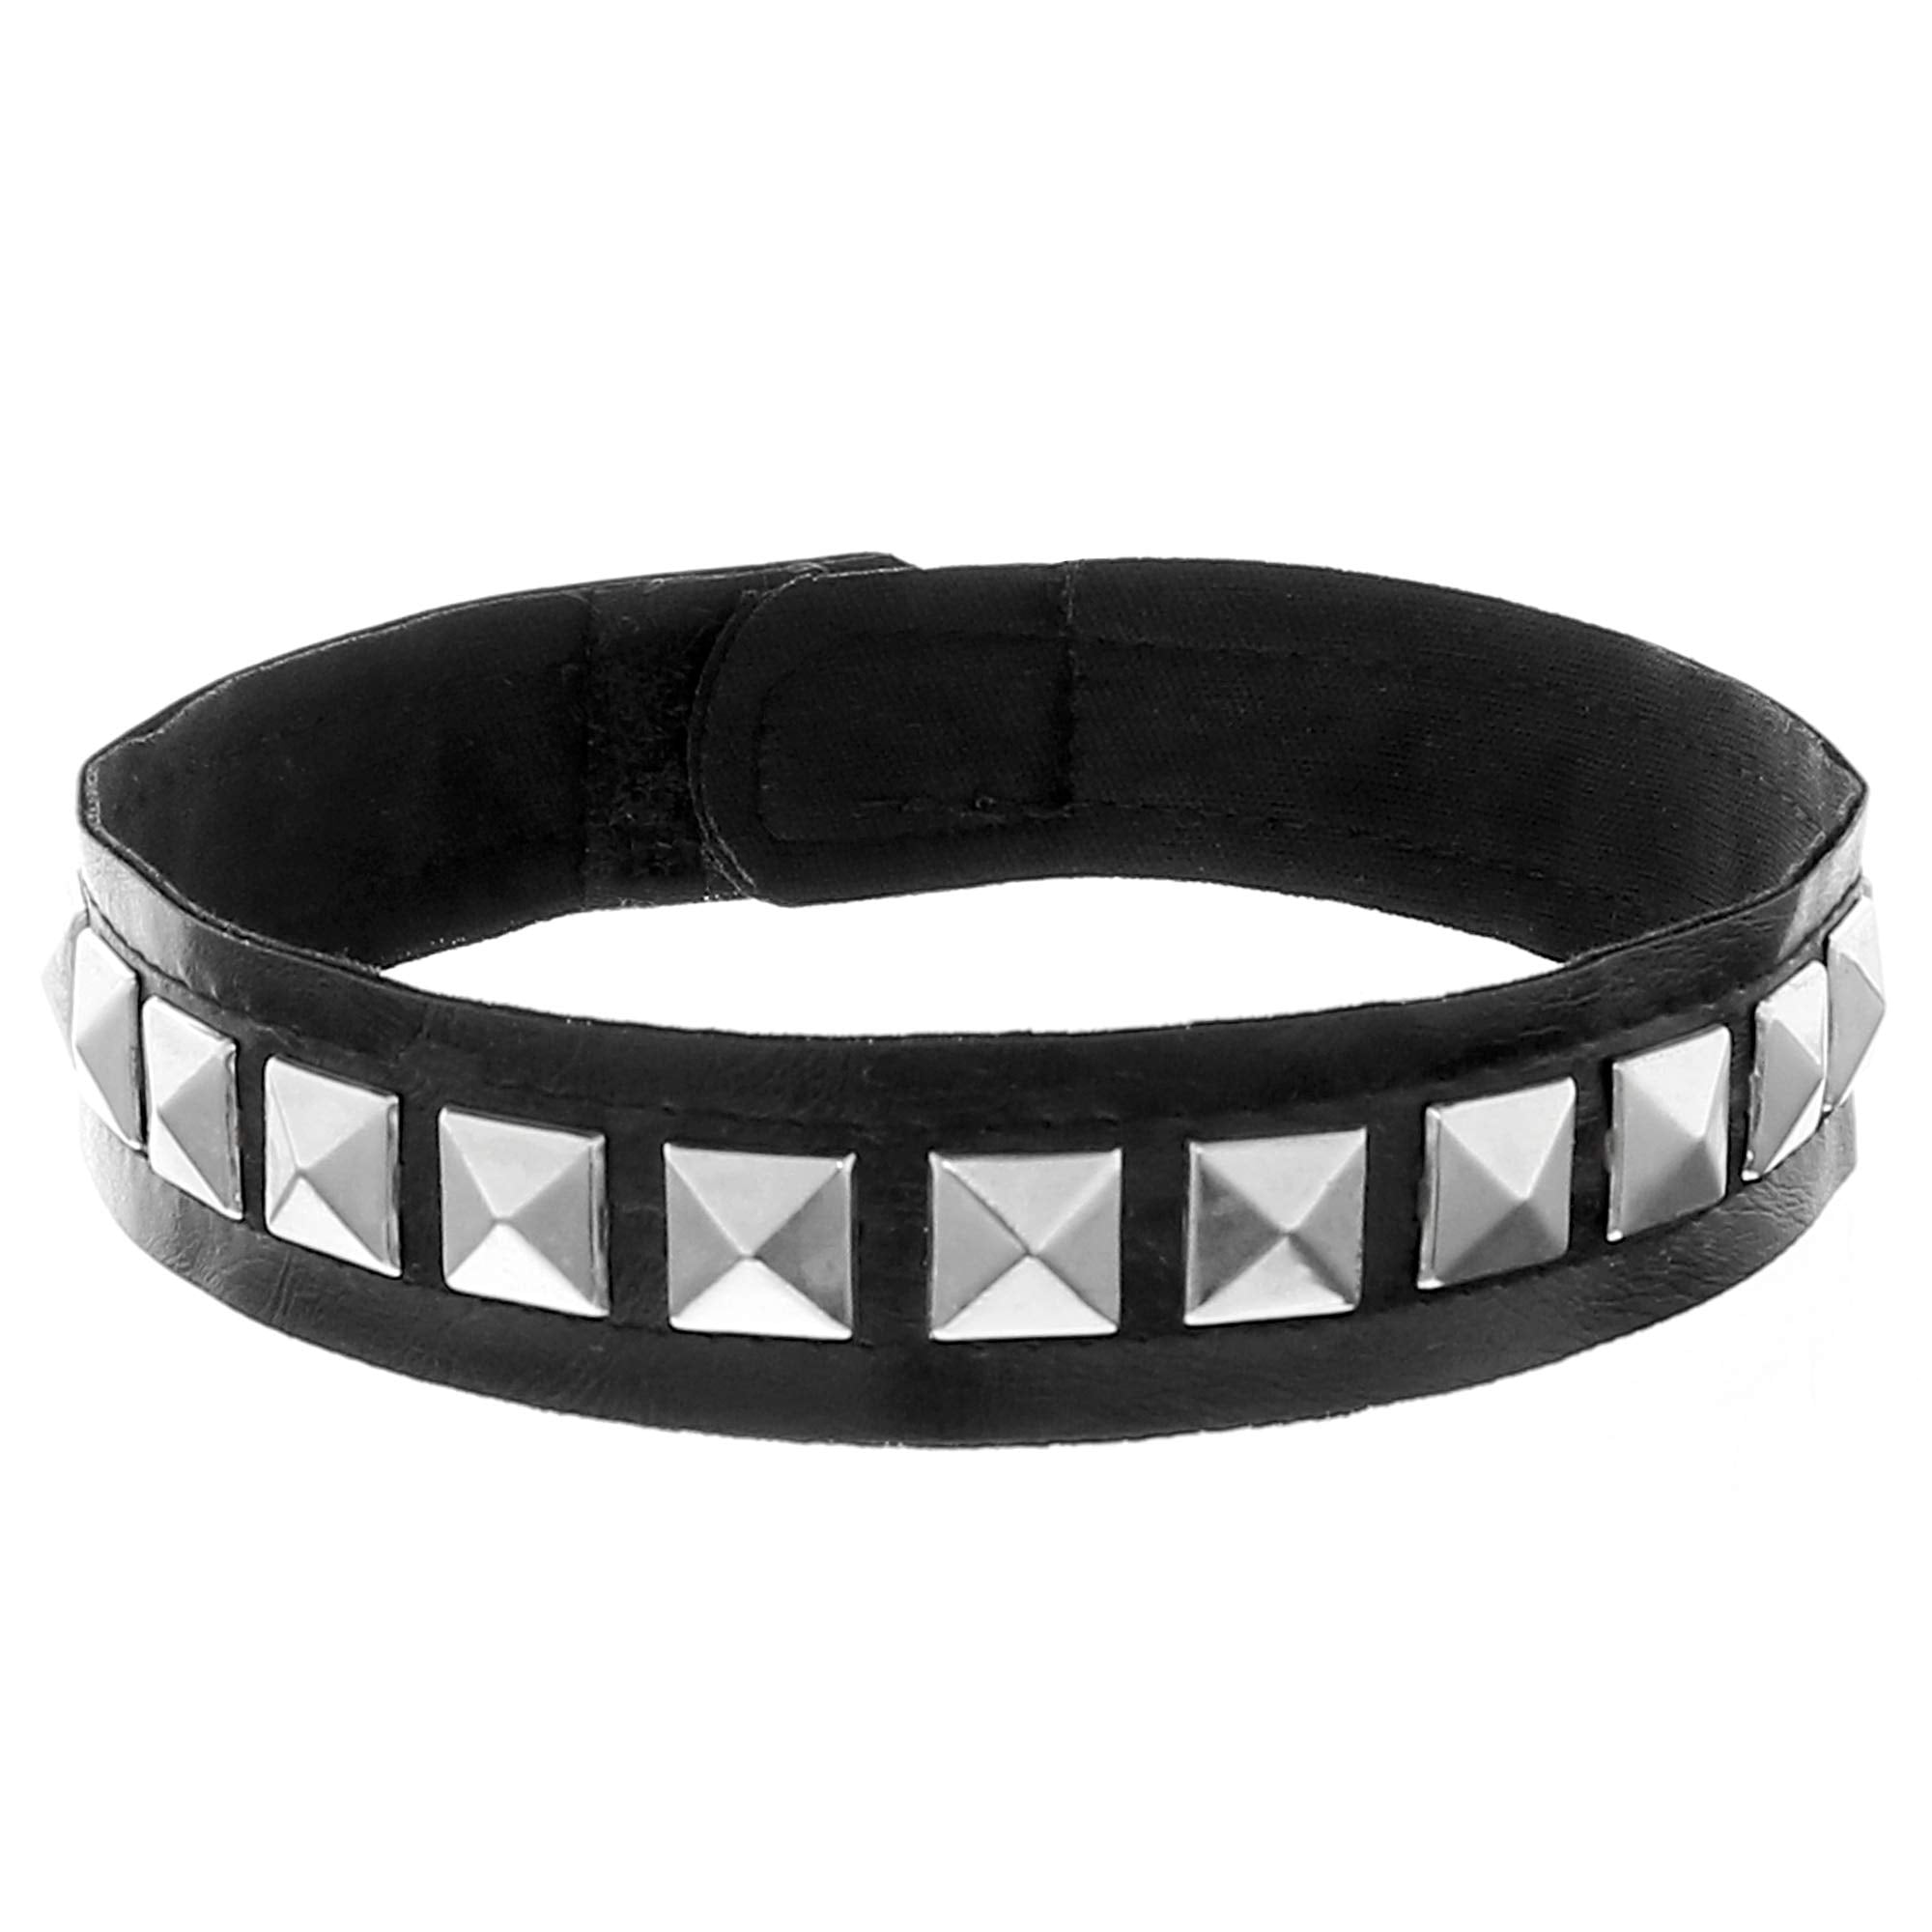 Skeleteen Biker Leather Studded Choker - Gothic Punk Rock N Roll Jewelry  Accessories Leather and Metal Collar Costume Necklace